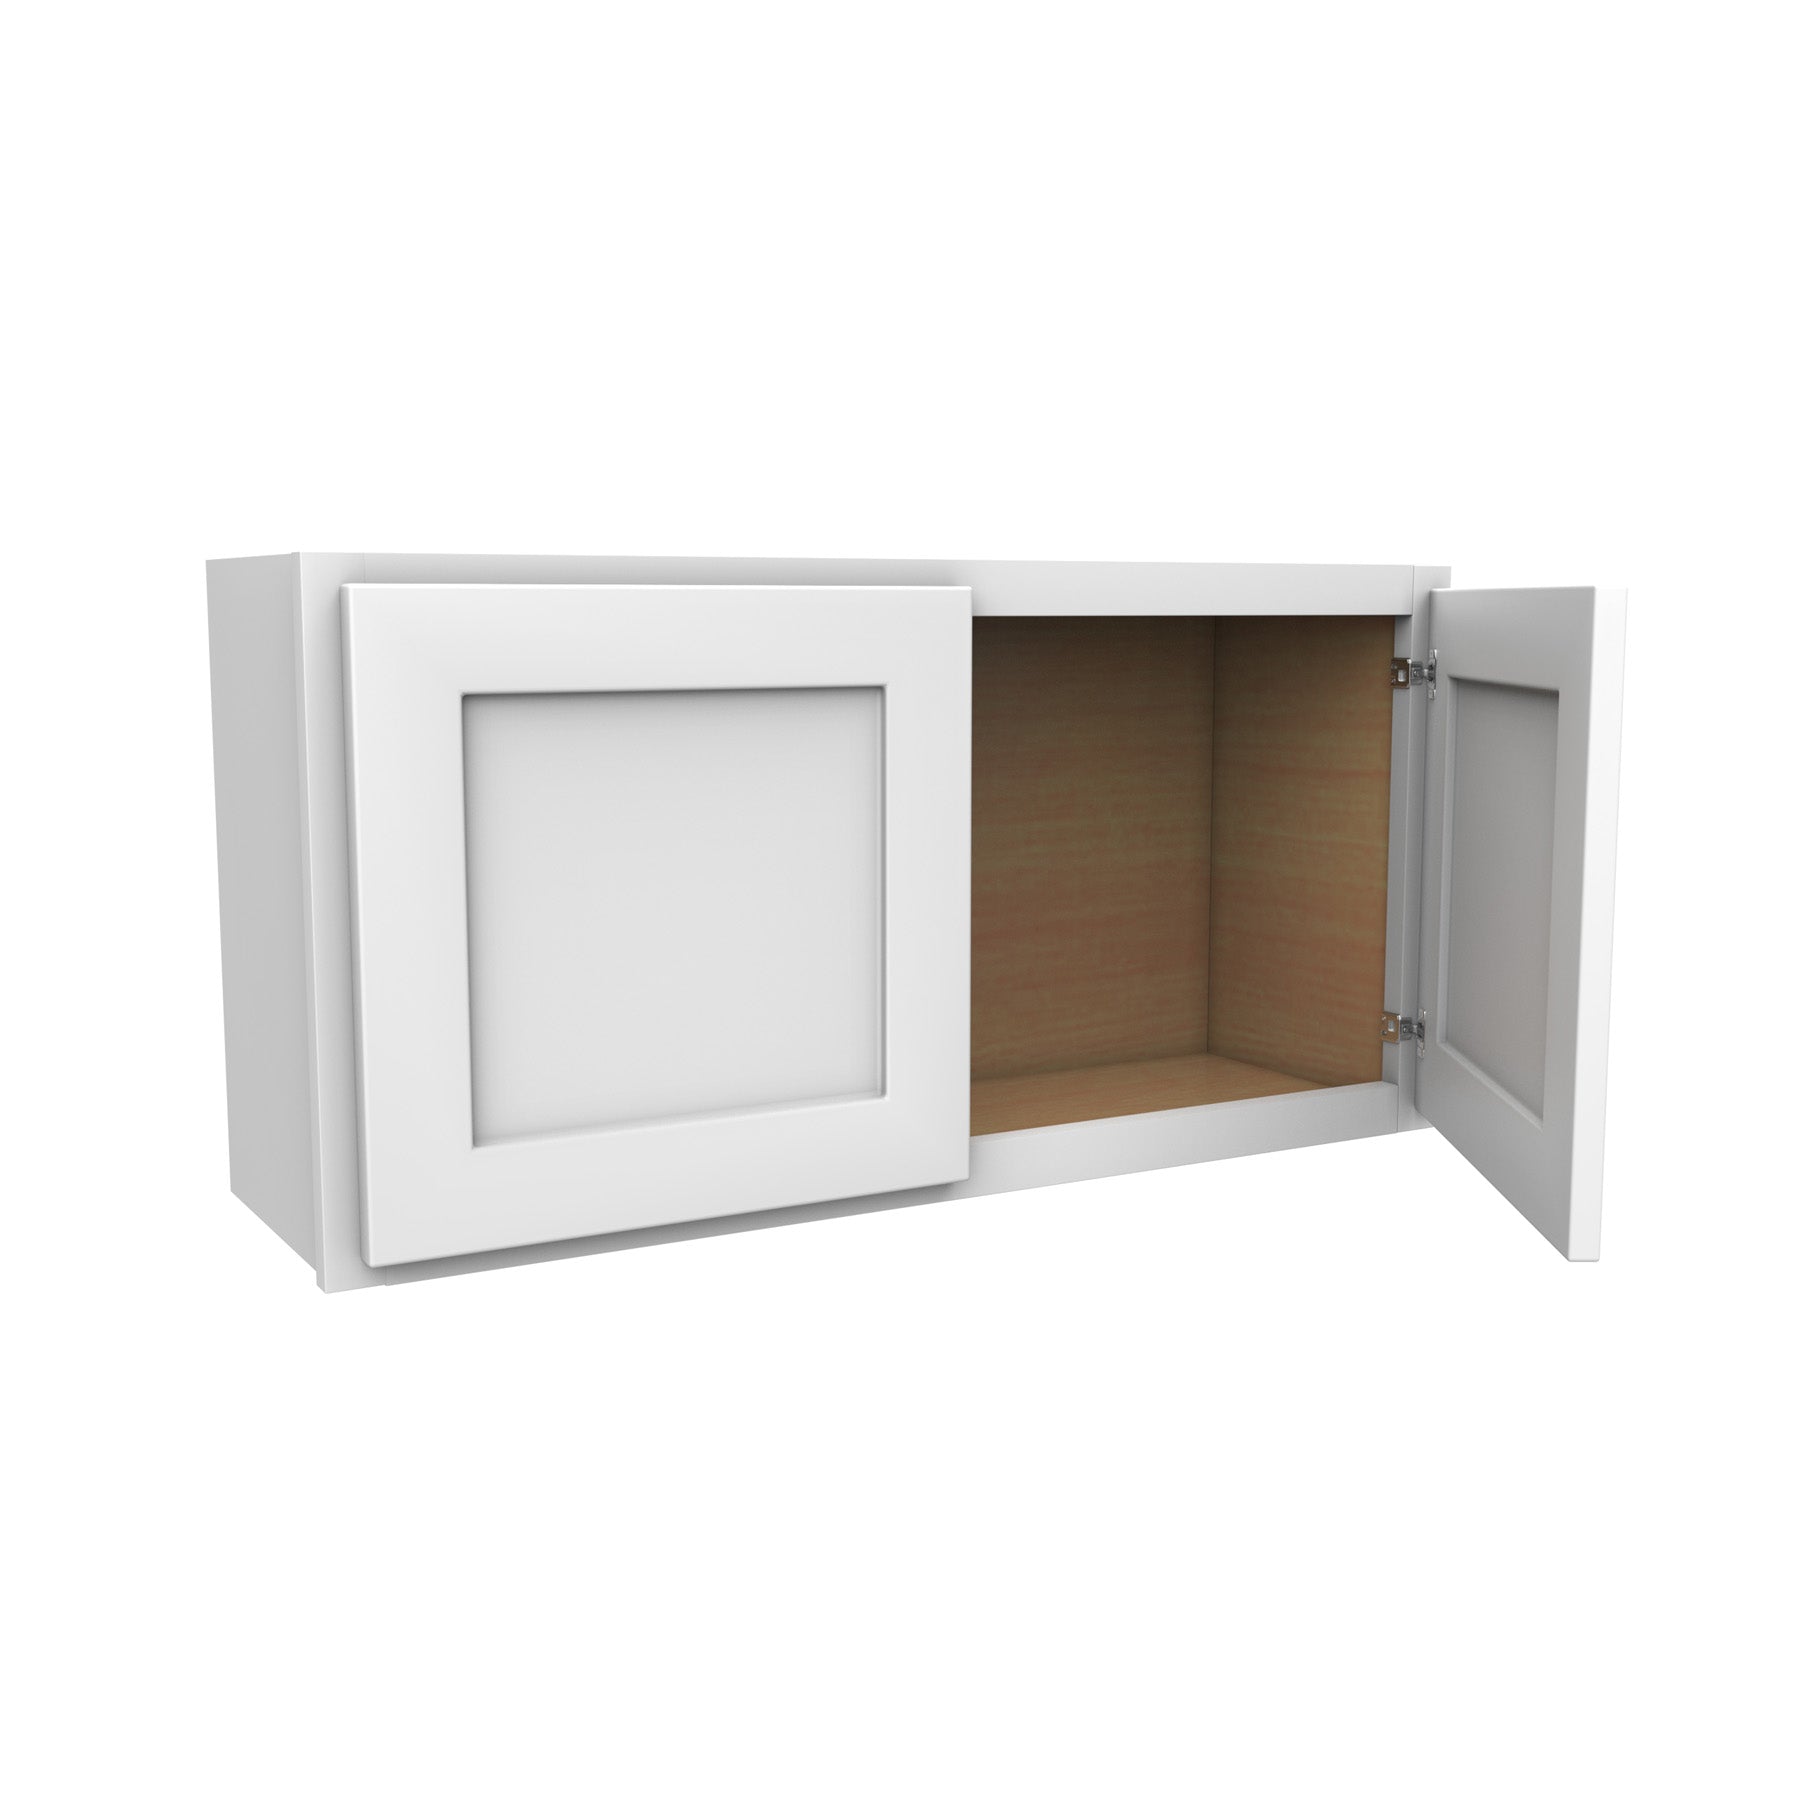 18 Inch High Double Door Wall Cabinet - Luxor White Shaker - Ready To Assemble, 36"W x 18"H x 12"D